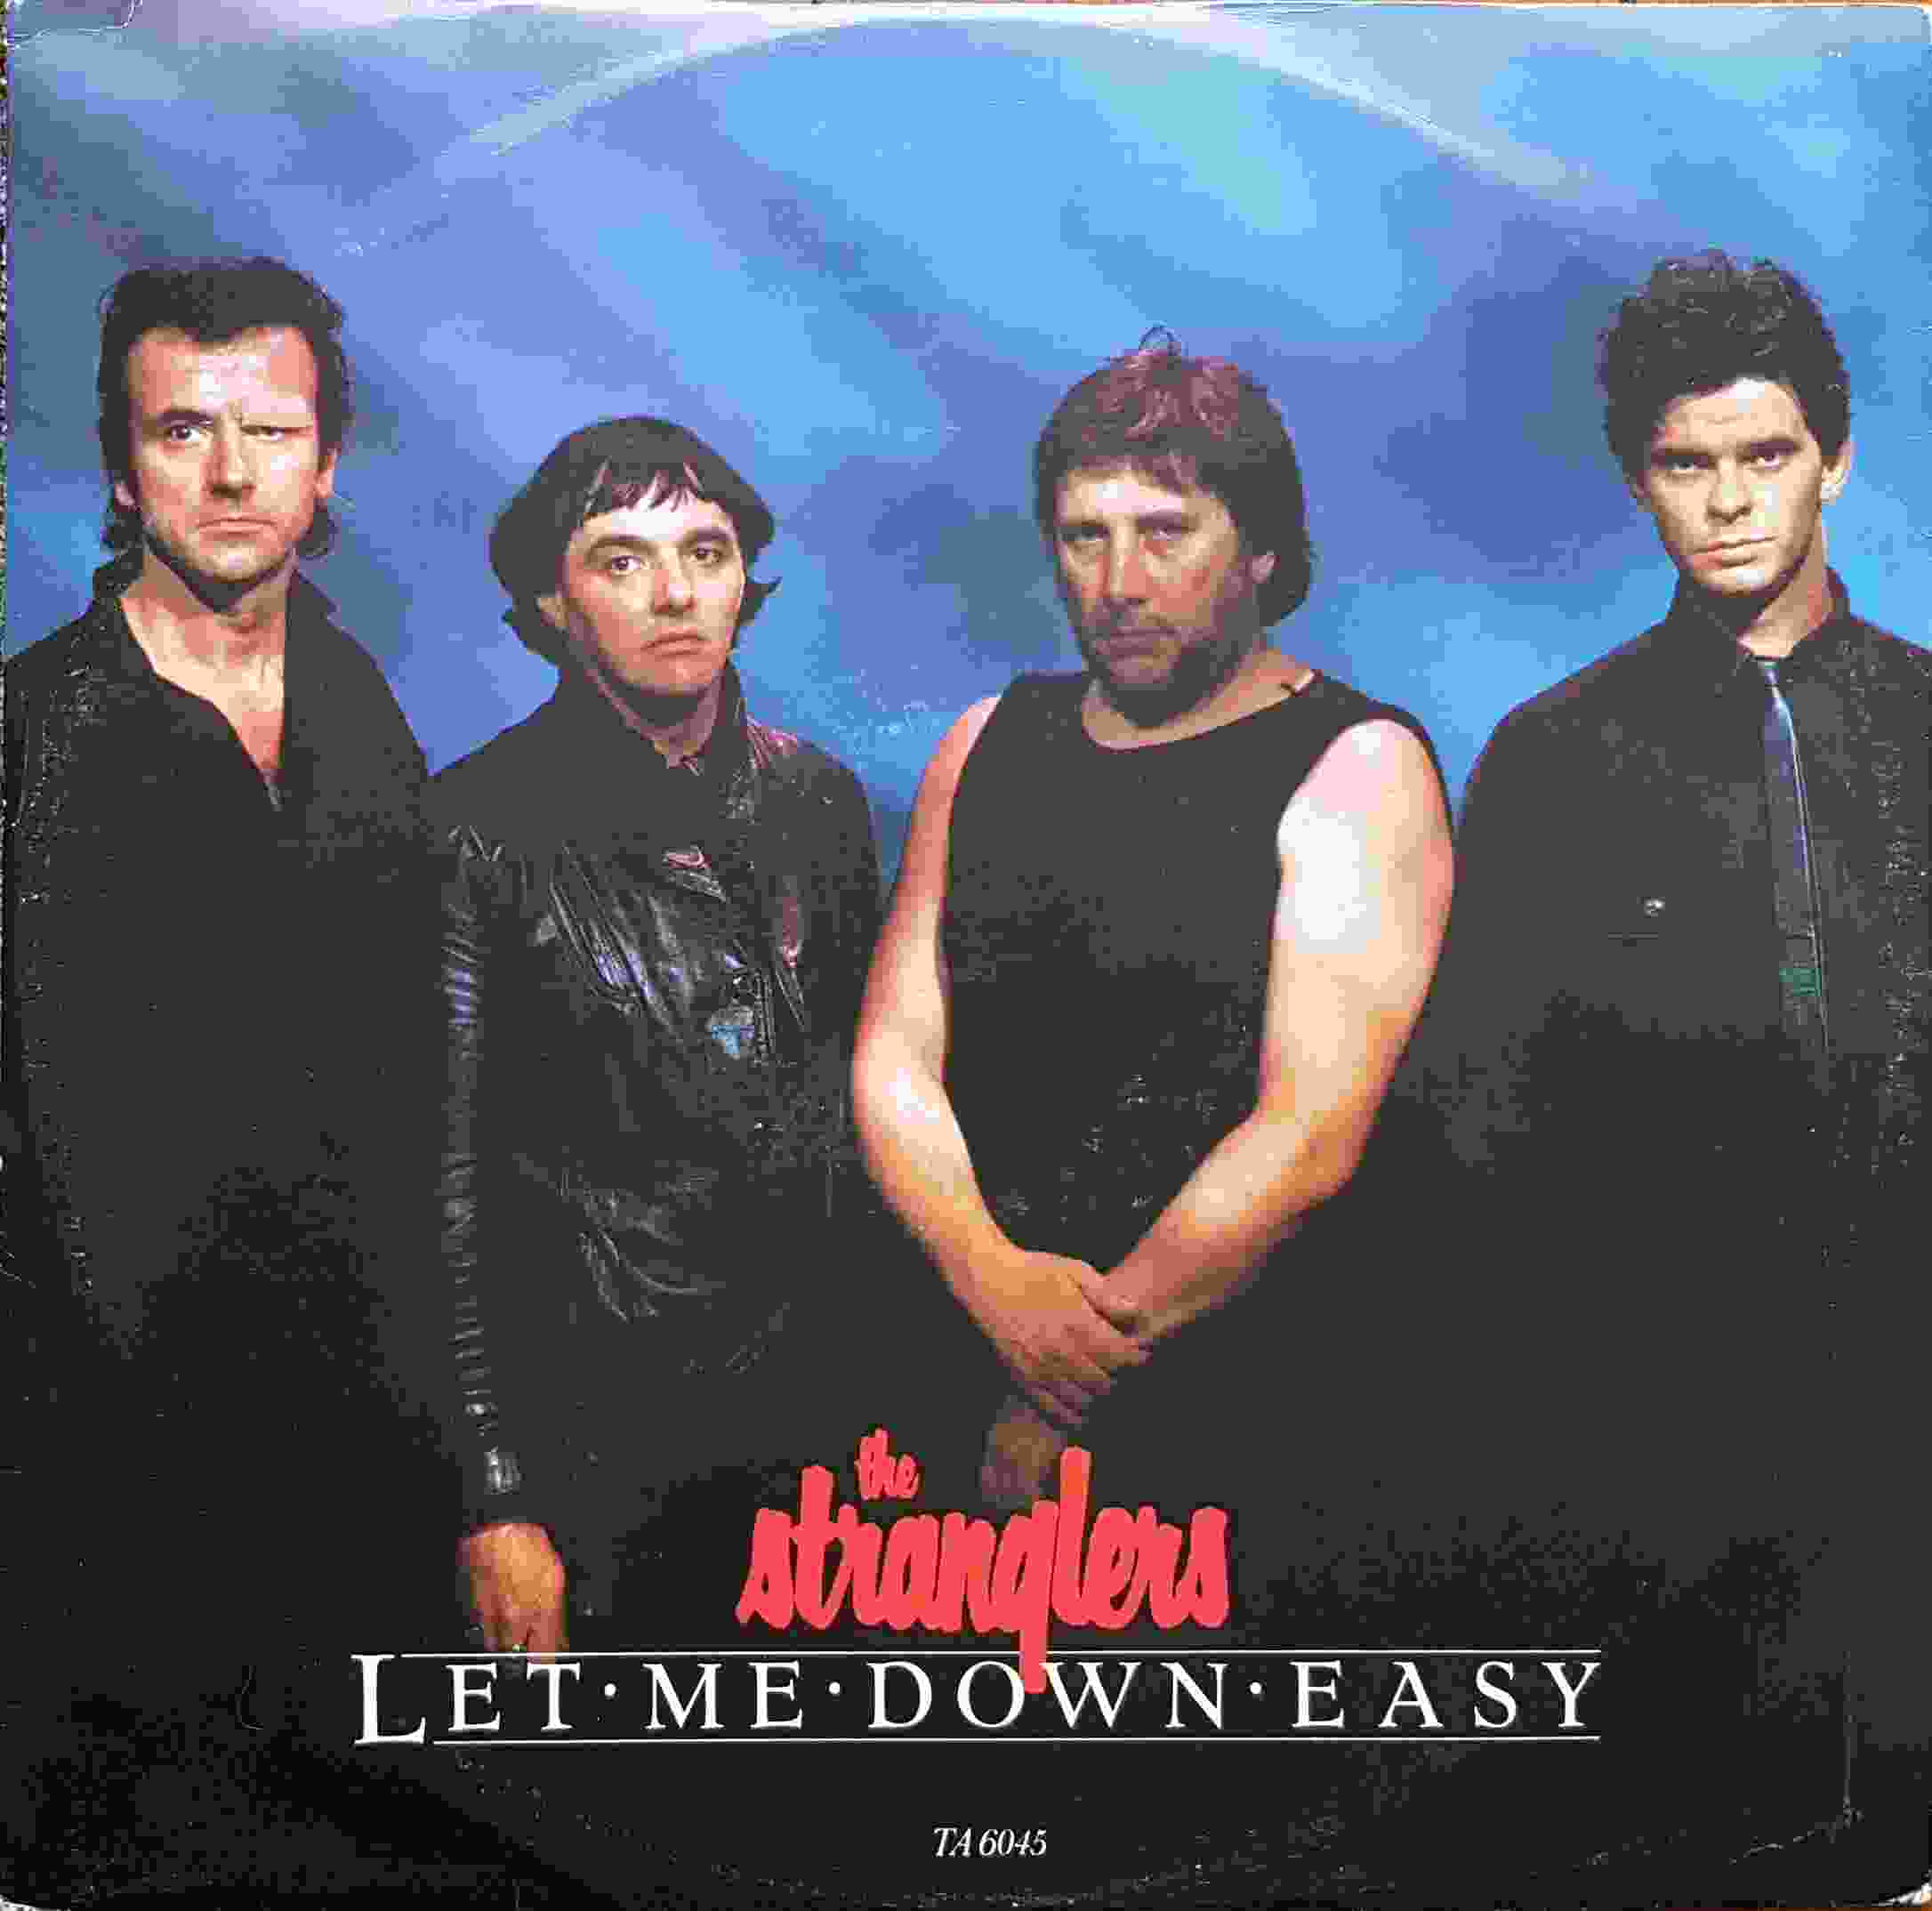 Picture of Let me down easy by artist The Stranglers  from The Stranglers 12inches